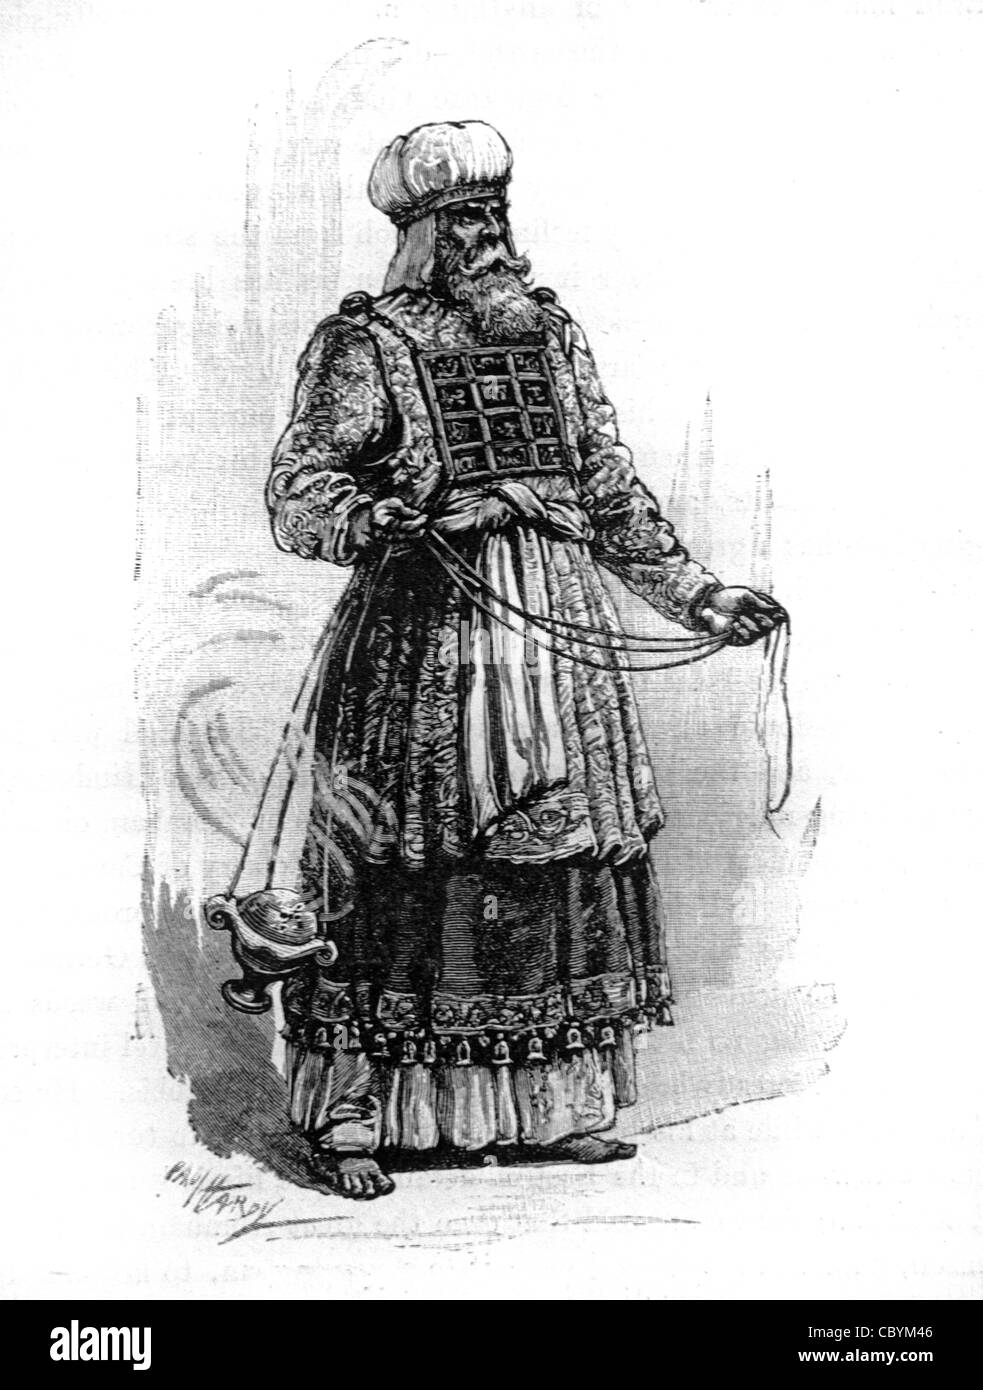 Jewish HIgh Priest wearing Sacred Costume of Vestments including an Ephod & Swinging Incense, Israel, c19th Engraving or Vintage Illustration Stock Photo